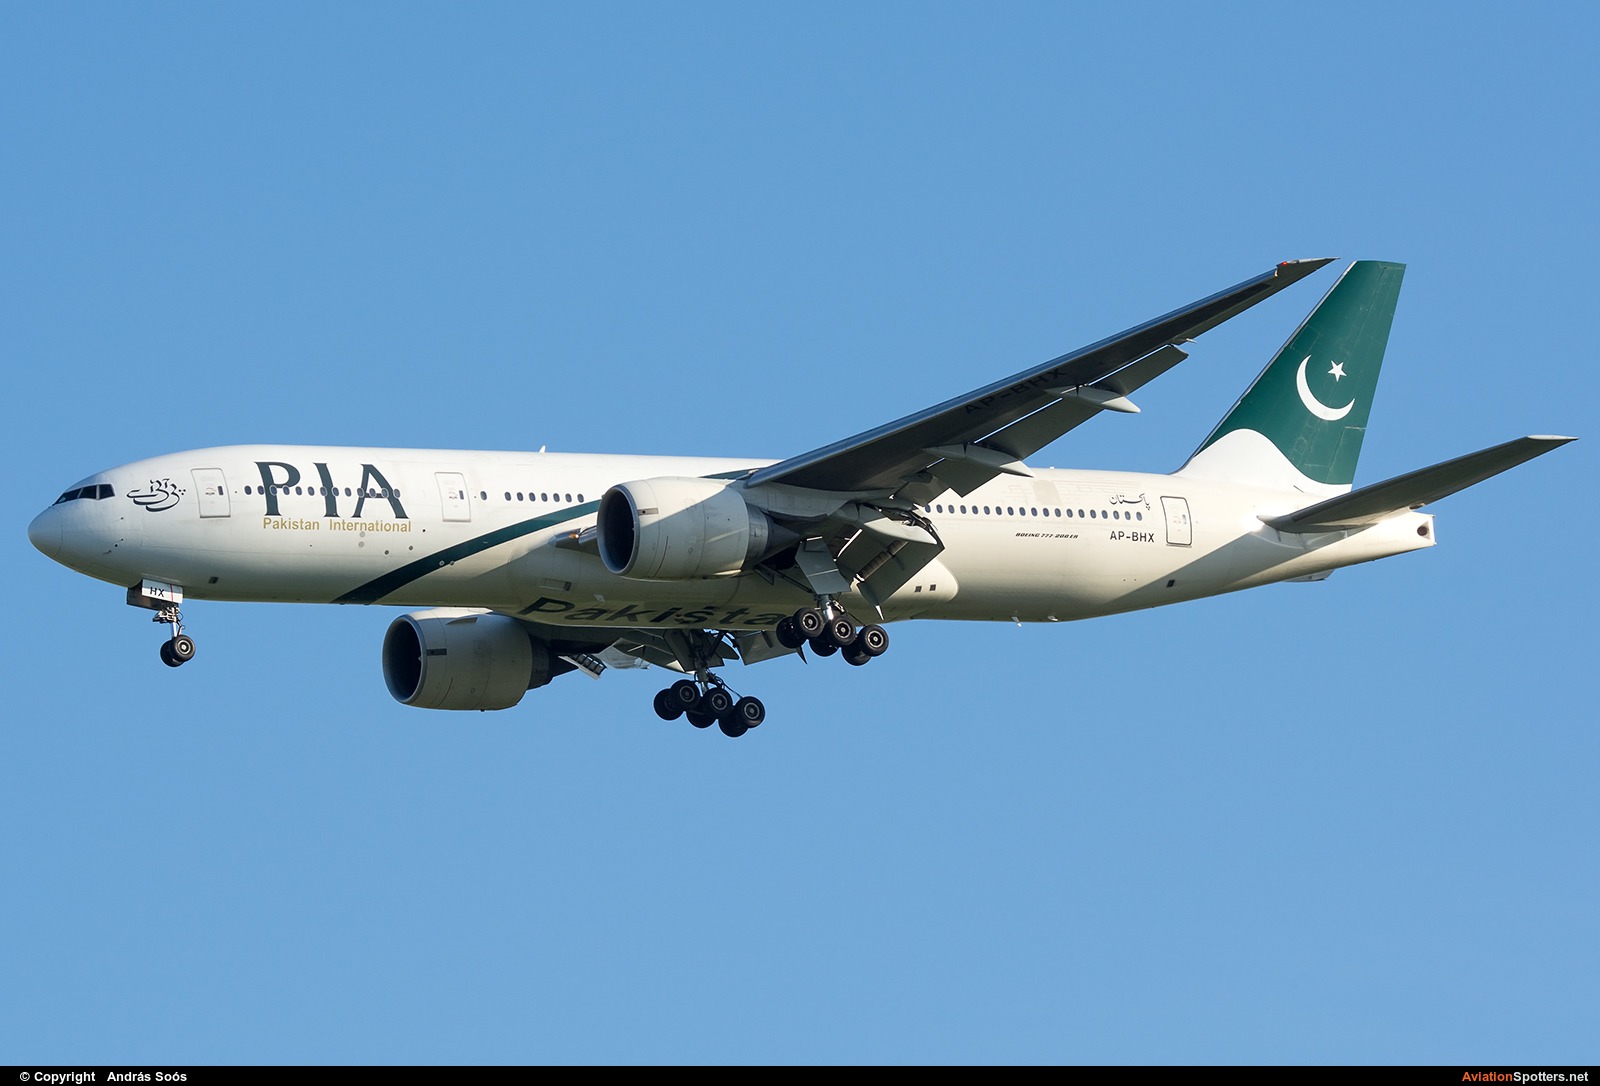 PIA - Pakistan International Airlines  -  777-200ER  (AP-BHX) By András Soós (sas1965)